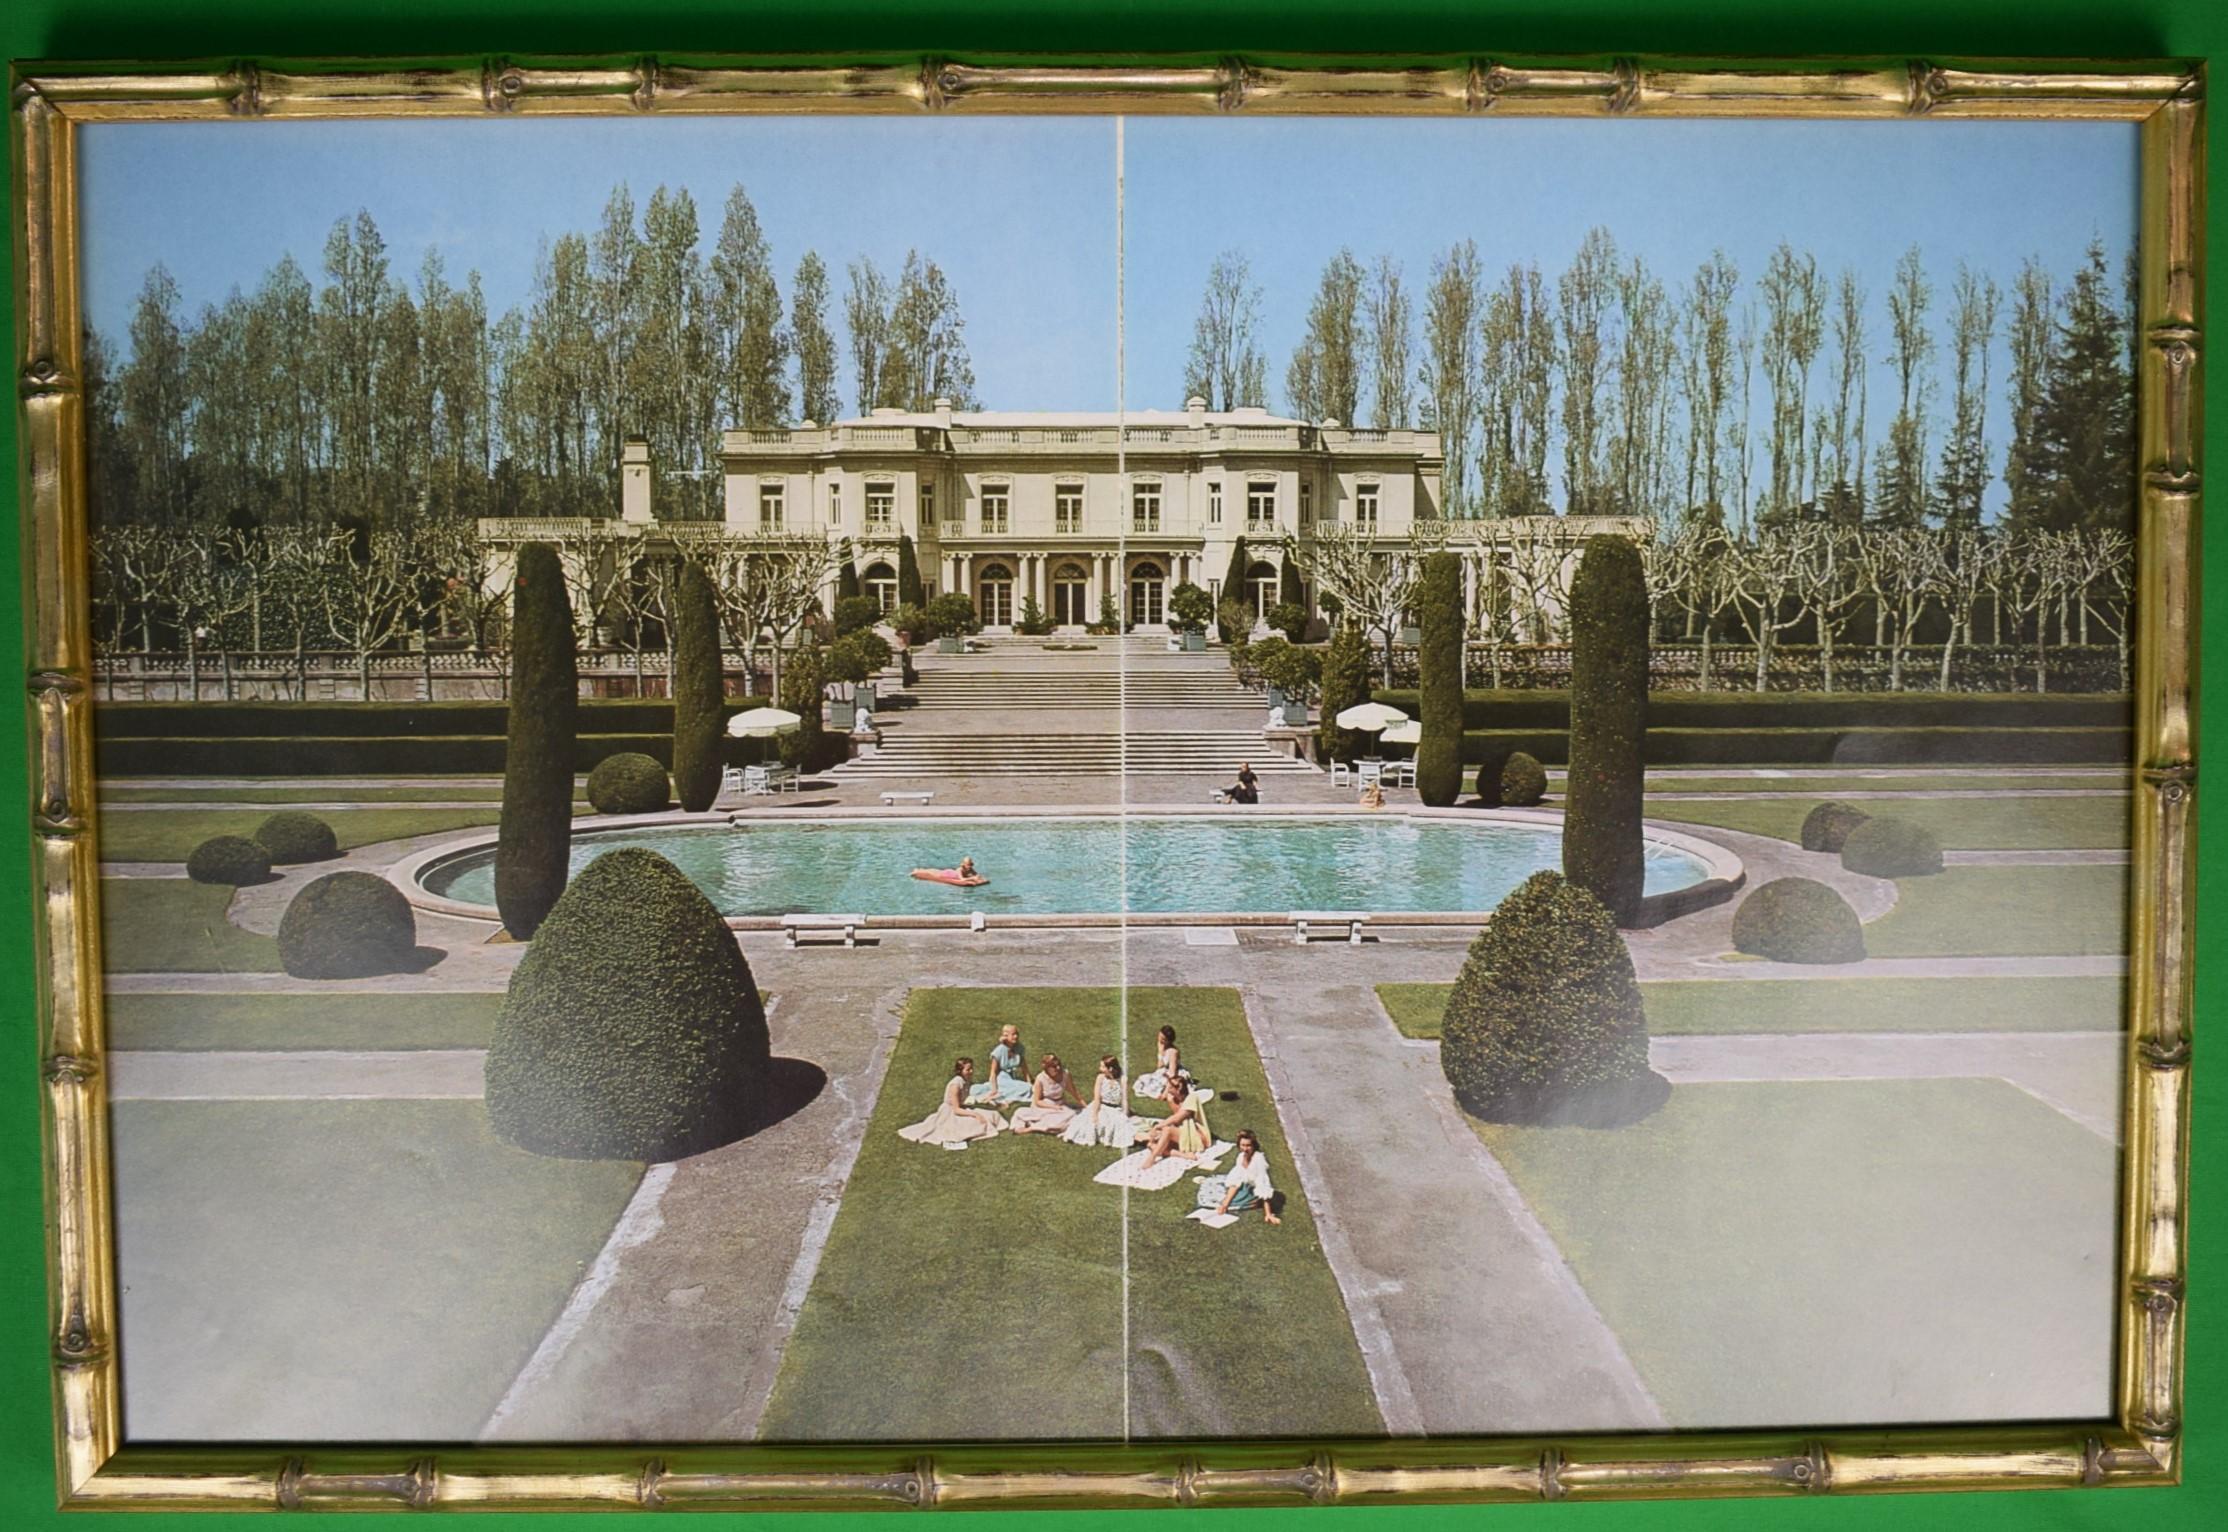 Art Sz: 13"H x 20"W

Frame Sz: 14 1/4"H x 21 1/4"W

In custom gilt bamboo frame

Original color double page from Slim Aarons' iconic book "A Wonderful Time" published 1974

The former George Newhall estate, its house and gardens modeled after Le